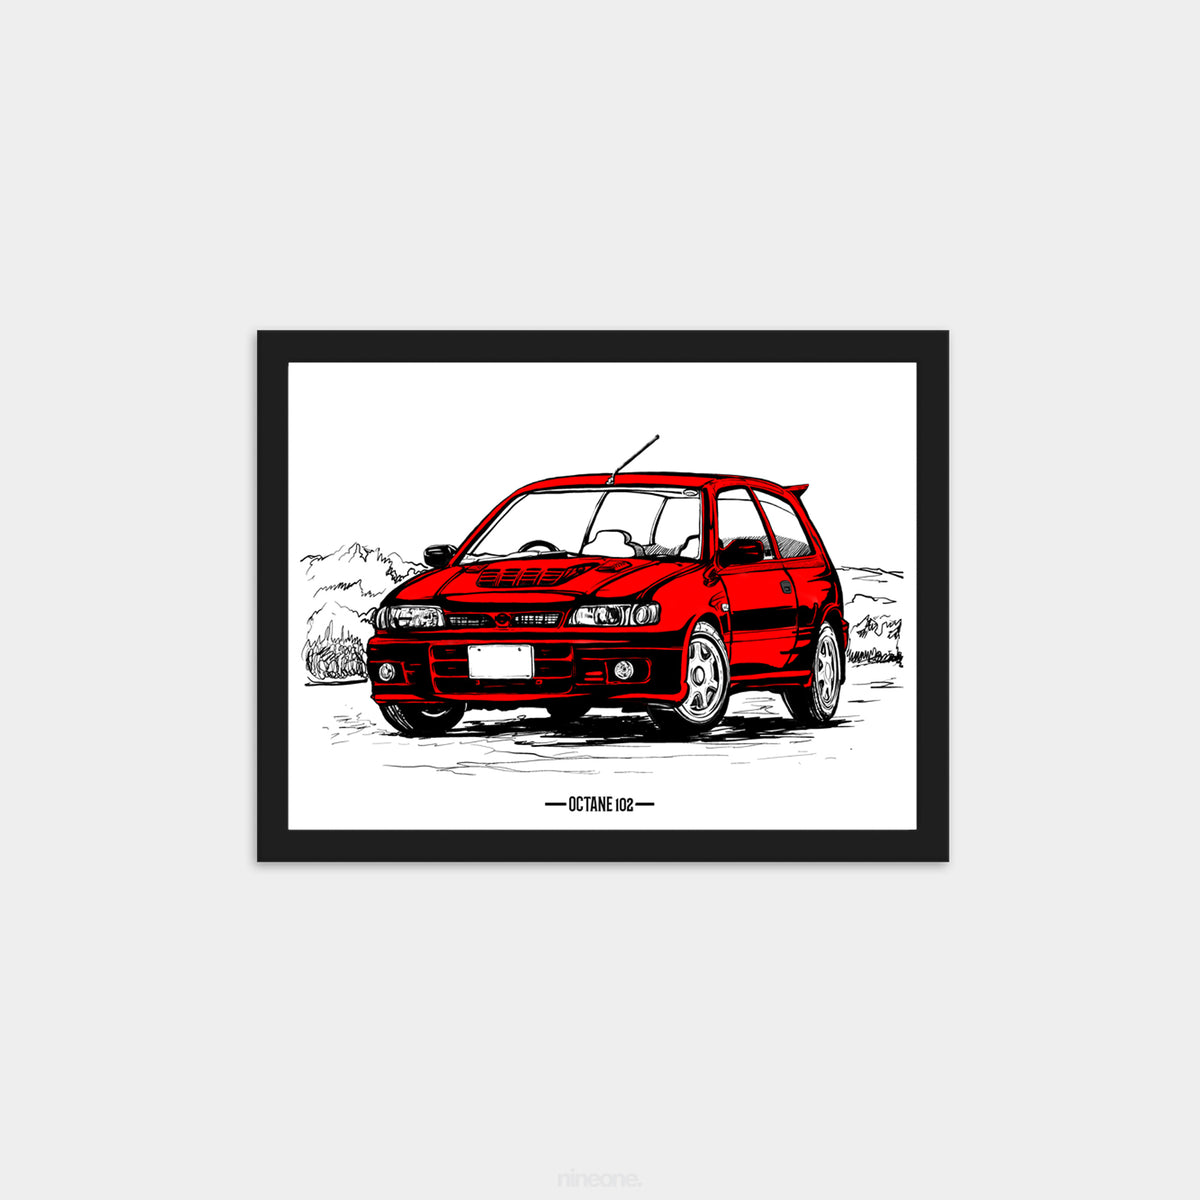 Pulsar GTI-R Poster by Octane102.